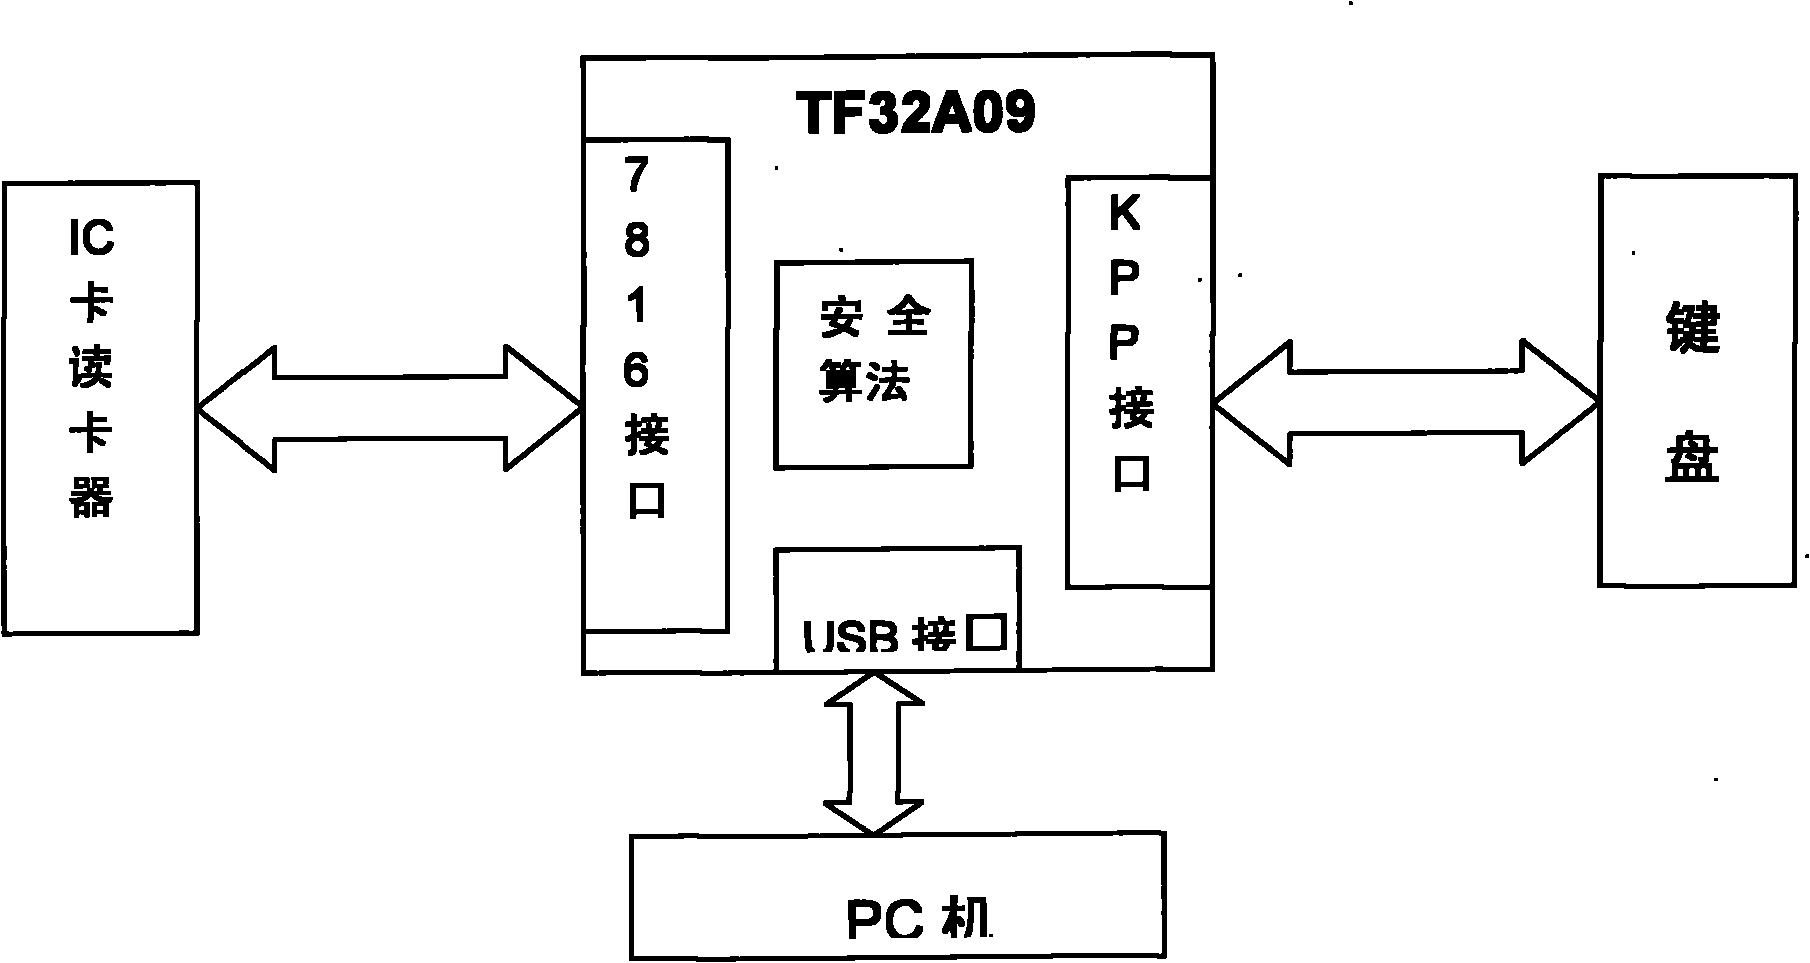 Single-chip based secure IC (integrated circuit) card swiping keyboard